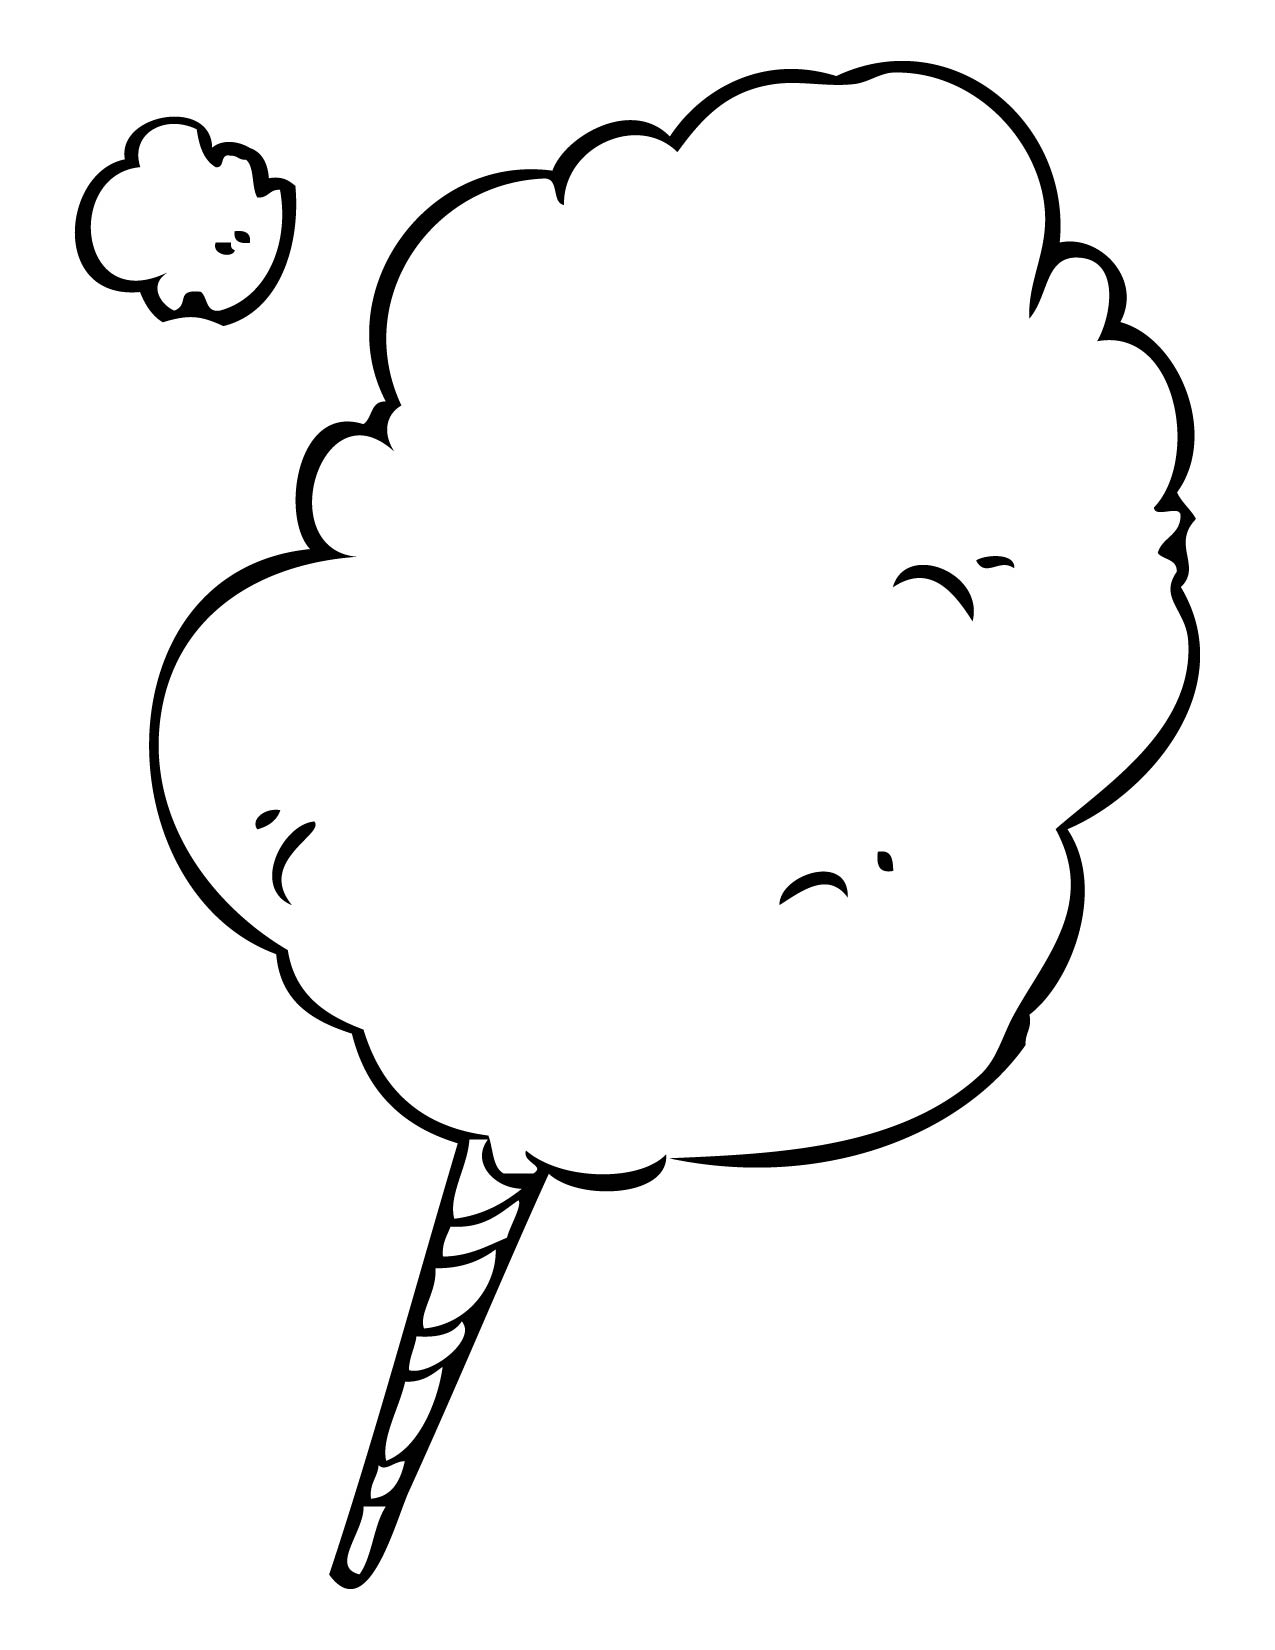 Cotton Candy Clipart Black And White - Free ...